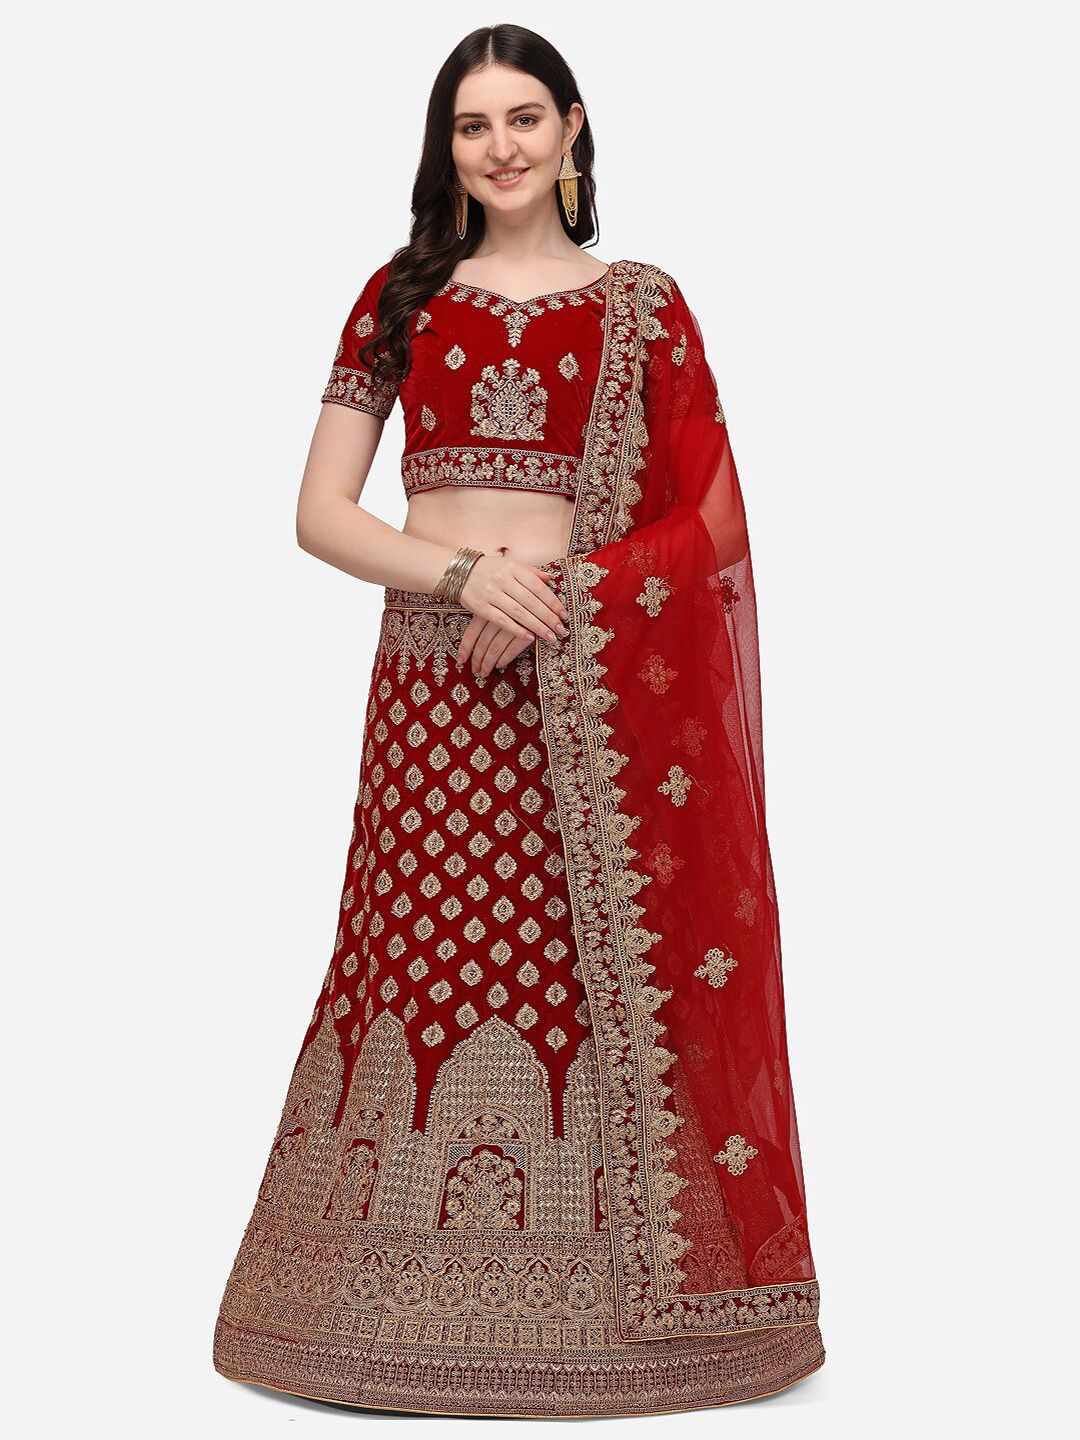 VRSALES Maroon Embroidered Semi-Stitched Lehenga & Unstitched Blouse With Dupatta Price in India